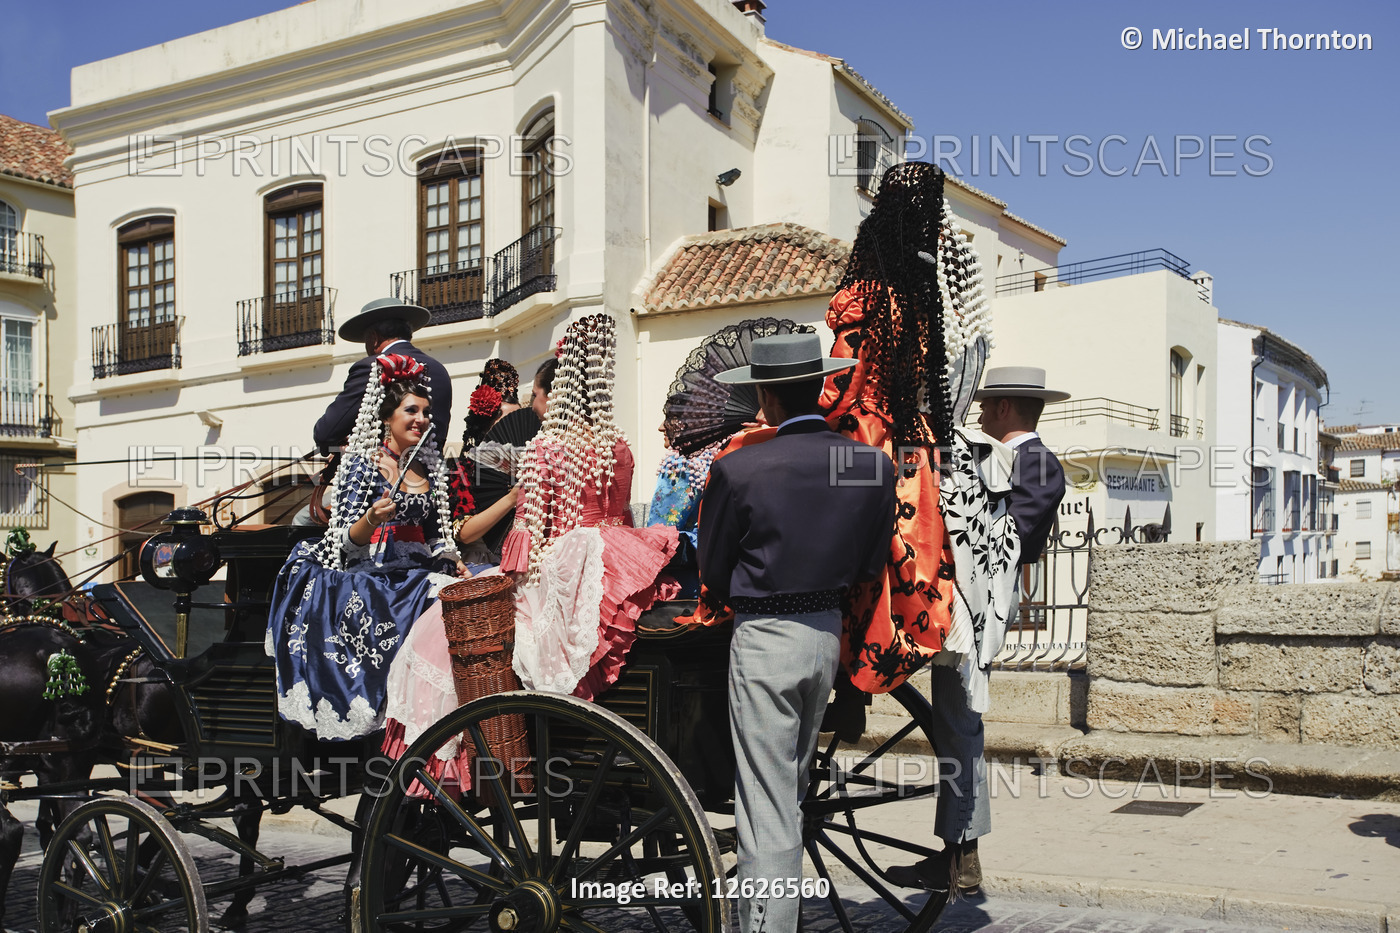 Fiesta Goyesca de Pedro Romero. Horse and Carriage with people dressed in 18th ...